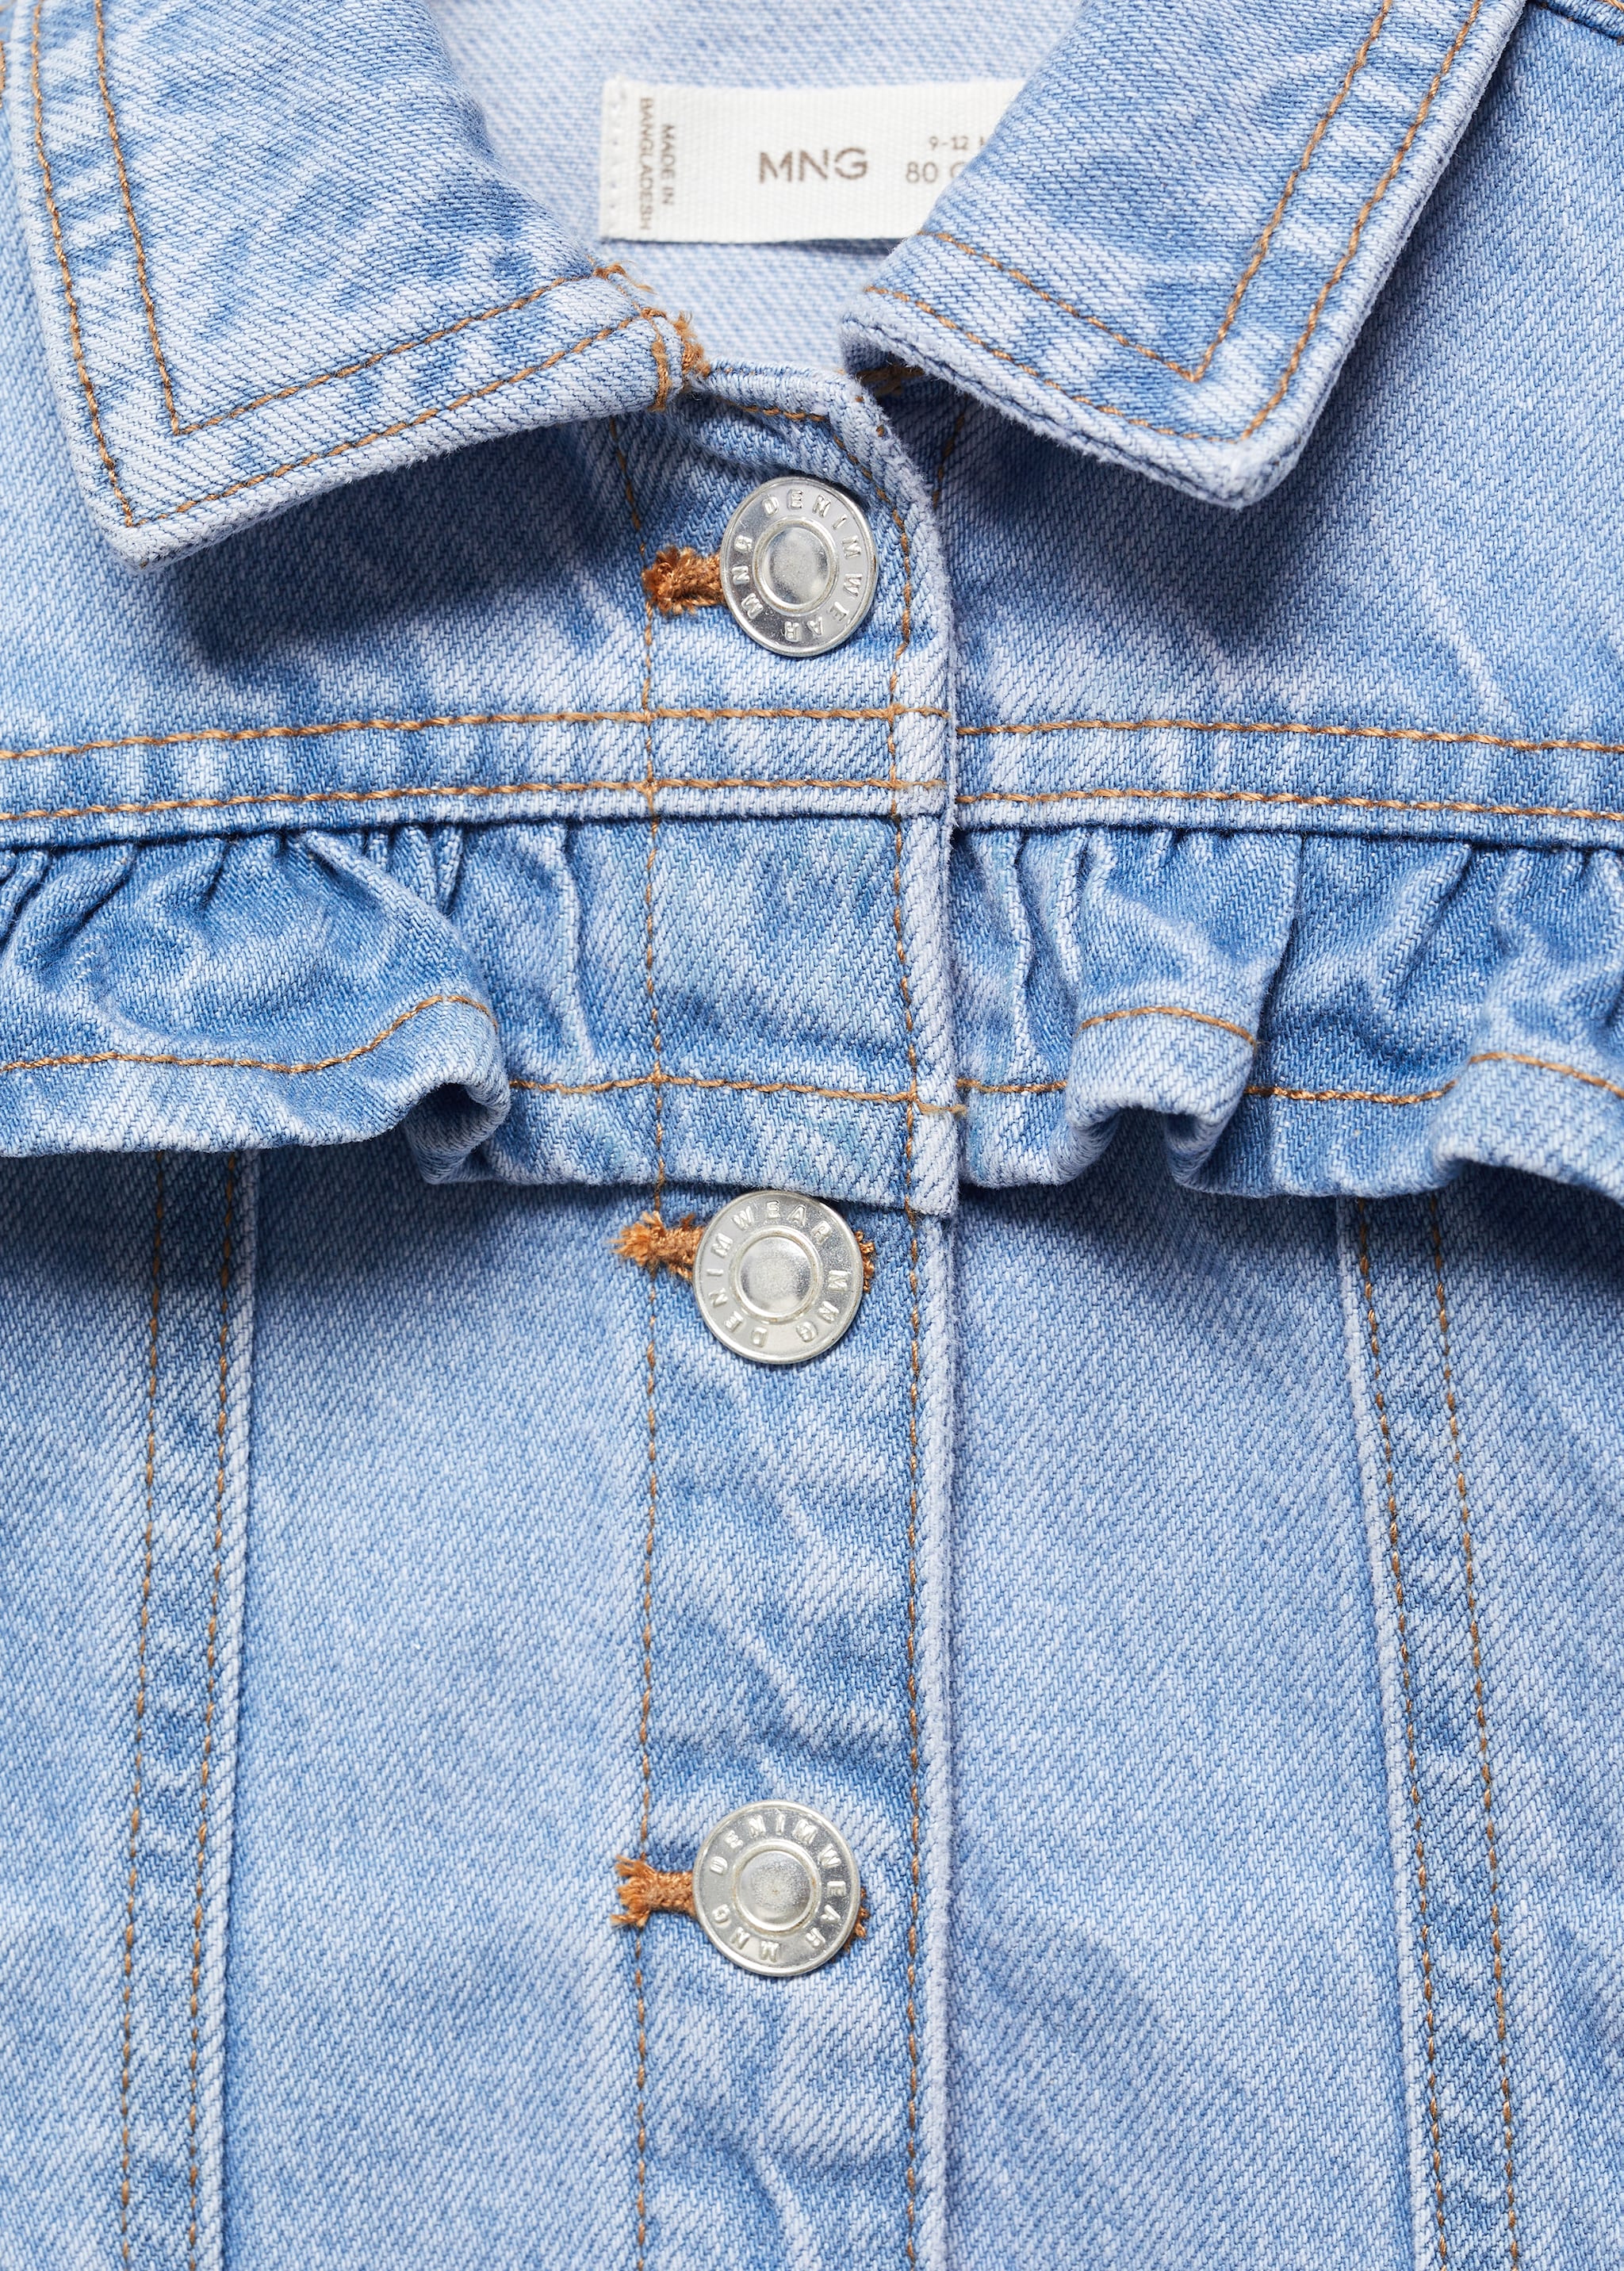 Ruffled denim jacket - Details of the article 8